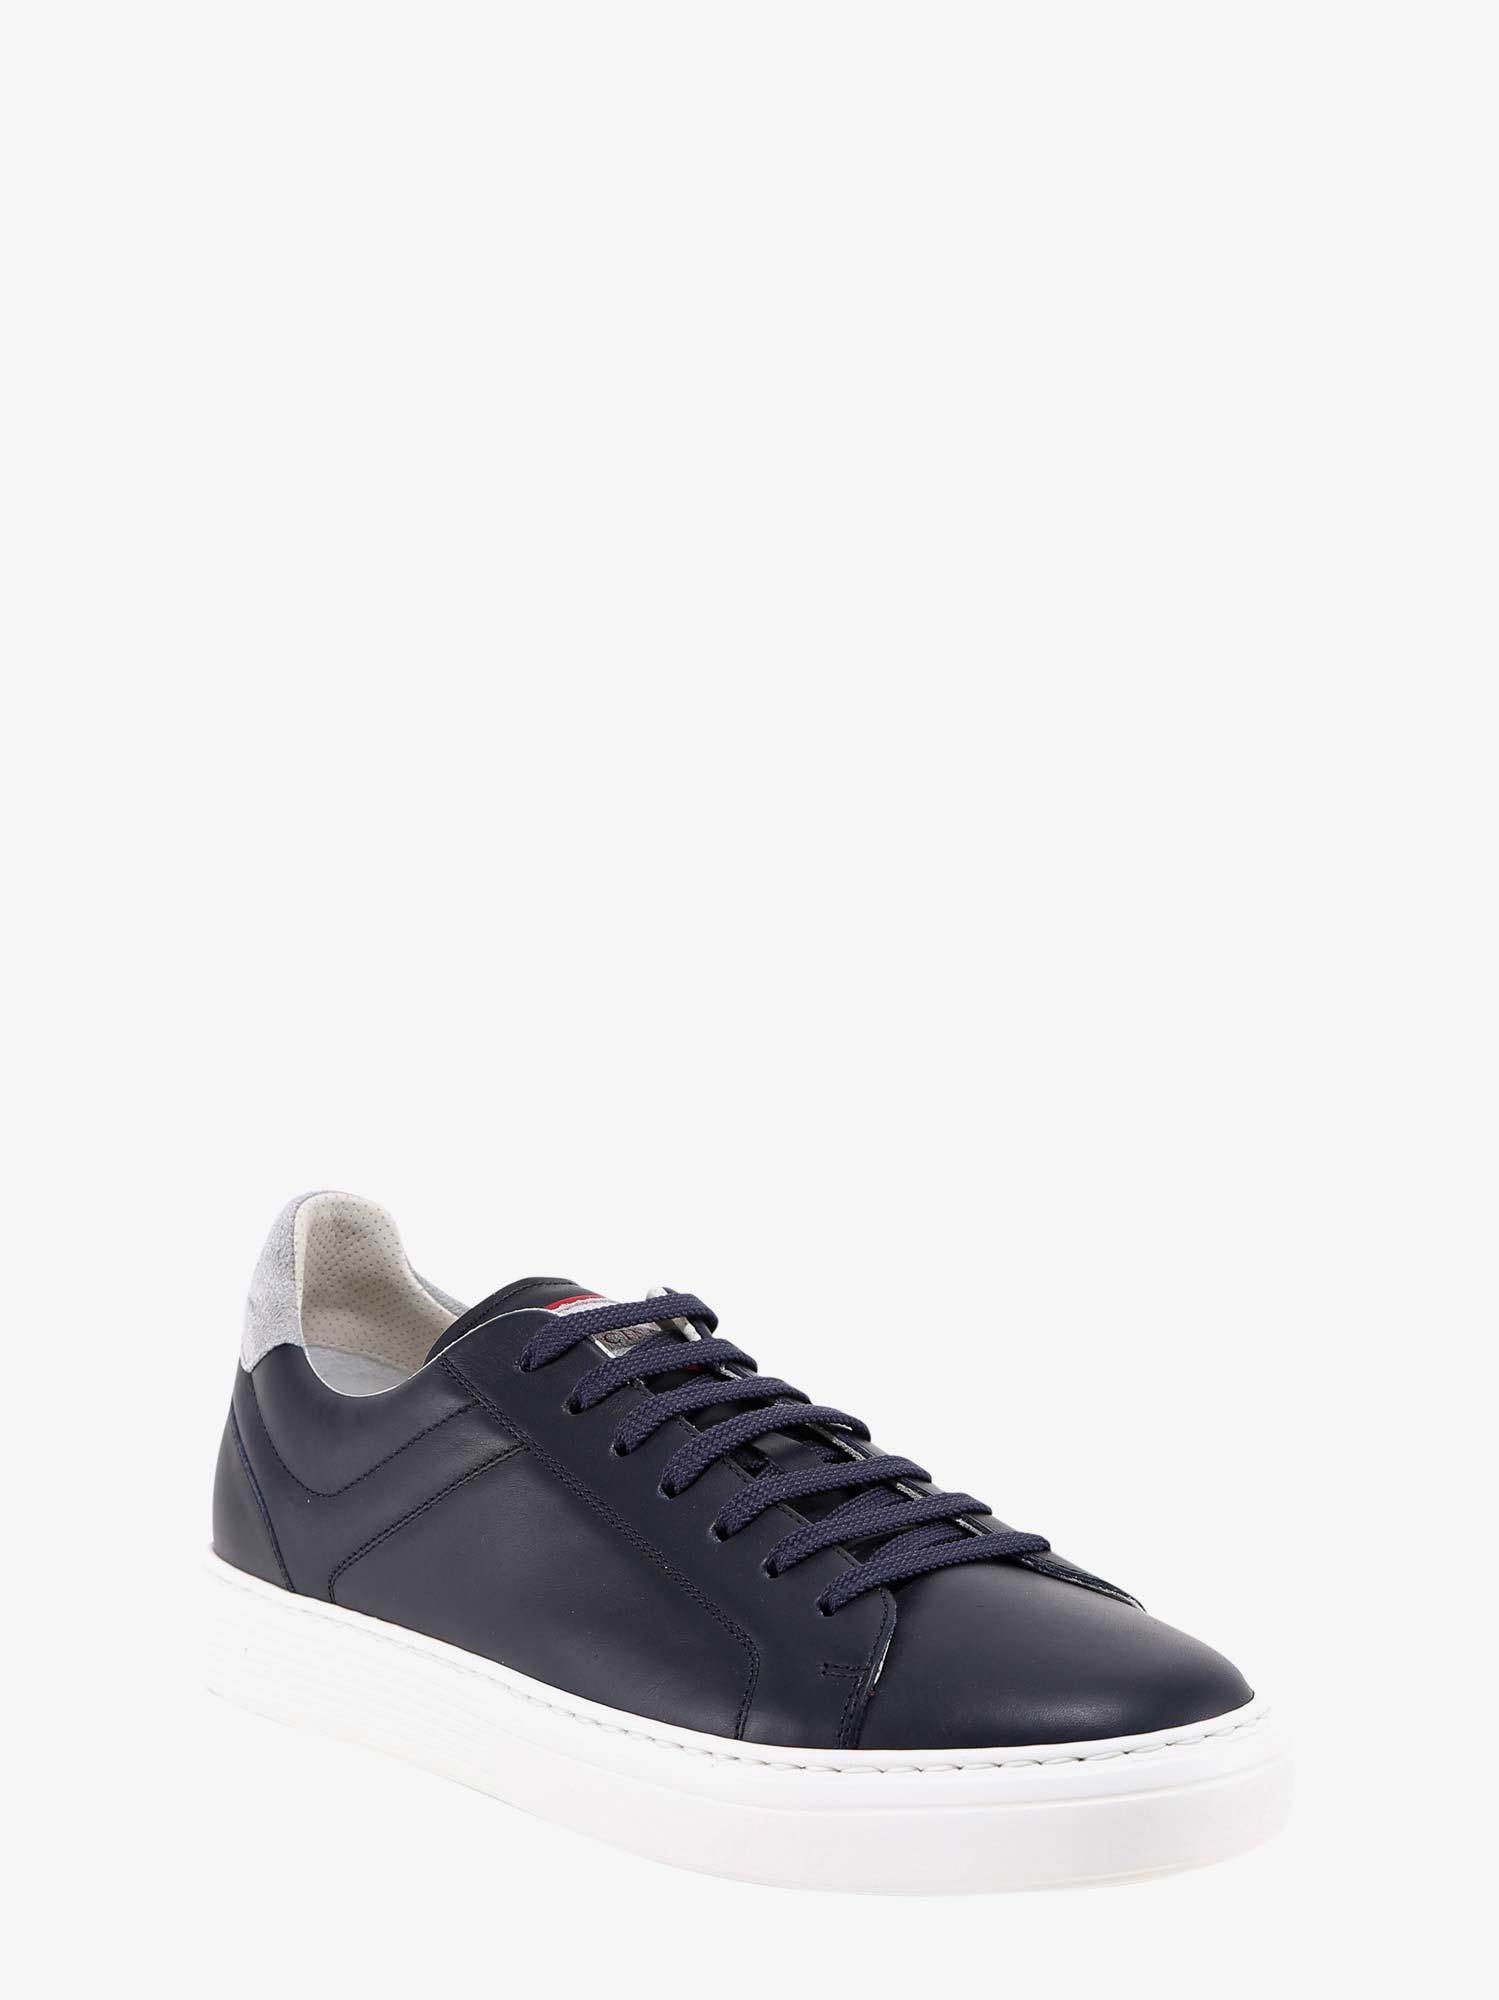 Brunello Cucinelli Leather Sneakers in Blue for Men - Lyst